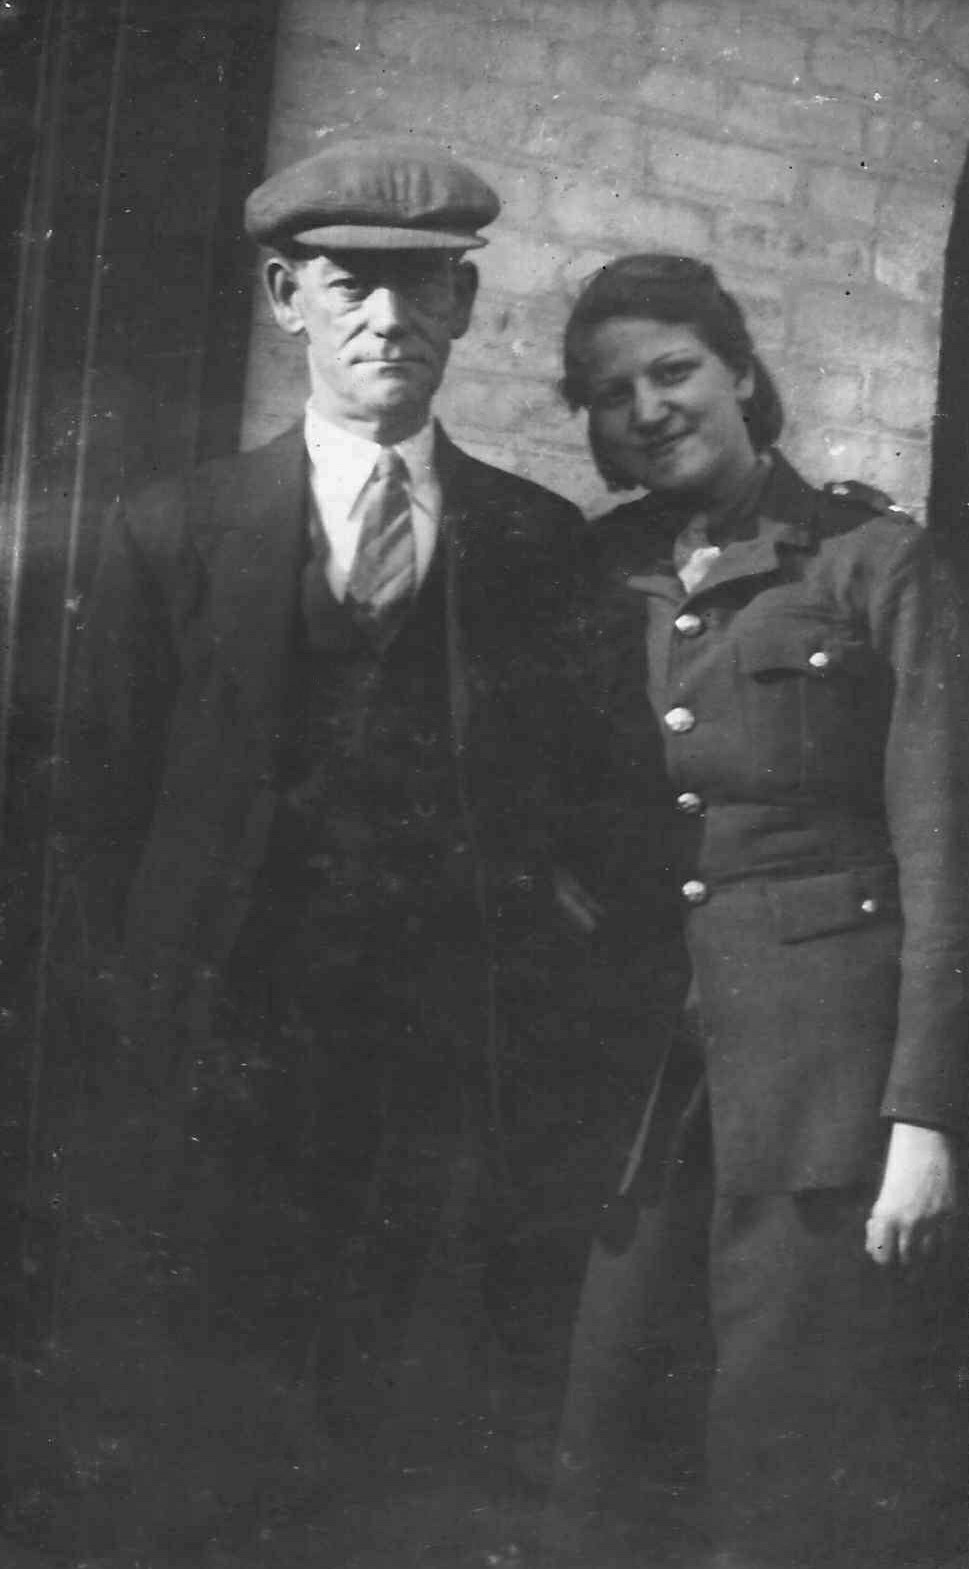 Arthur's wife, Joan, and father, Ernest Betts